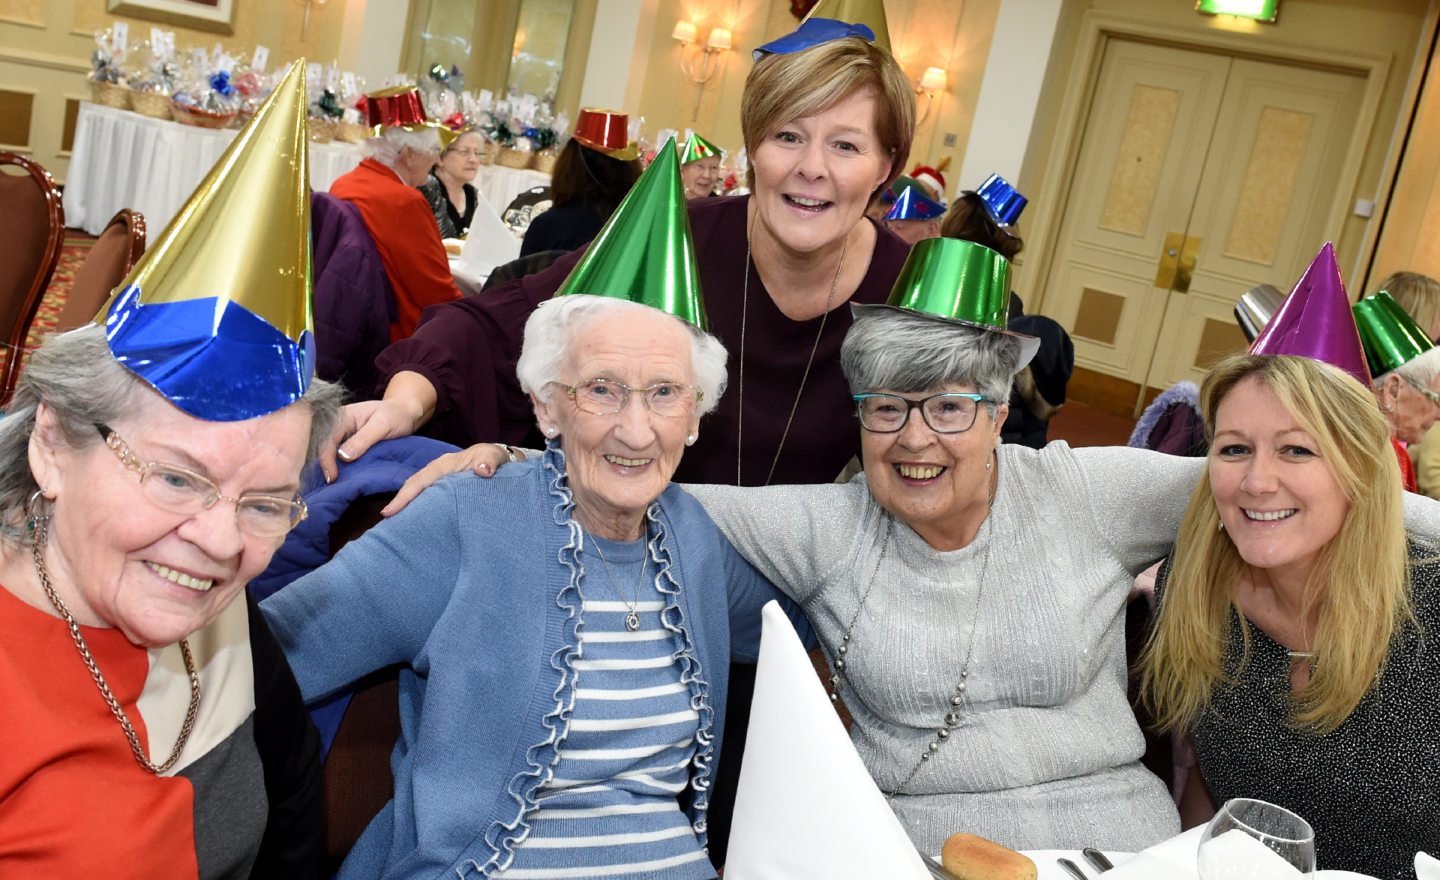 A charity party at the Dyce Marriott